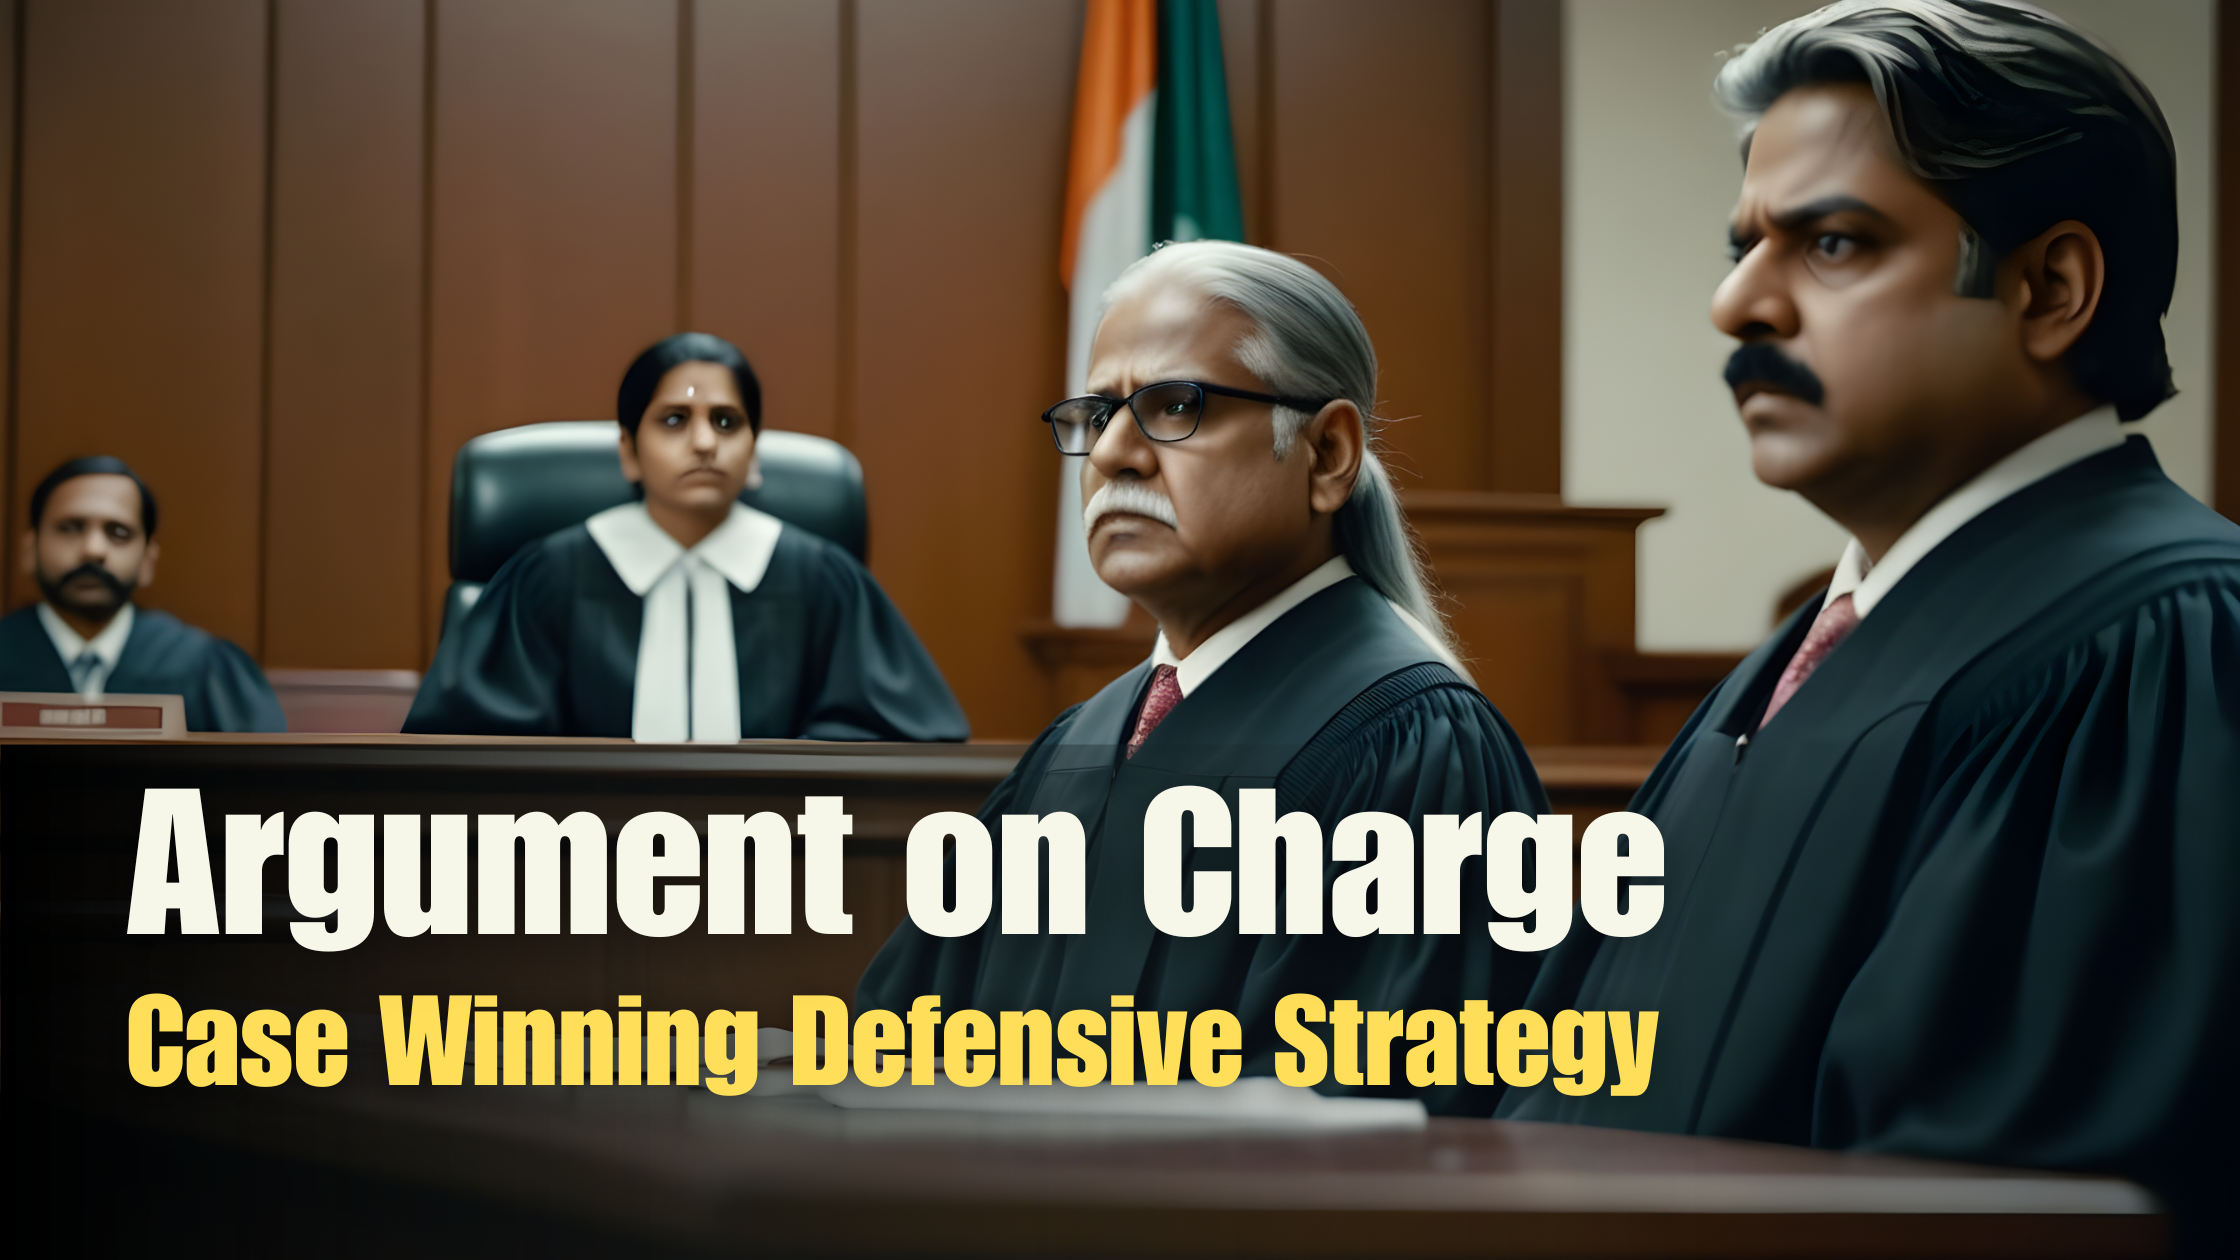 An Indian courtroom scene with a judge, a prosecutor, and a defense attorney standing before the bench. The judge is listening intently to the arguments being presented.